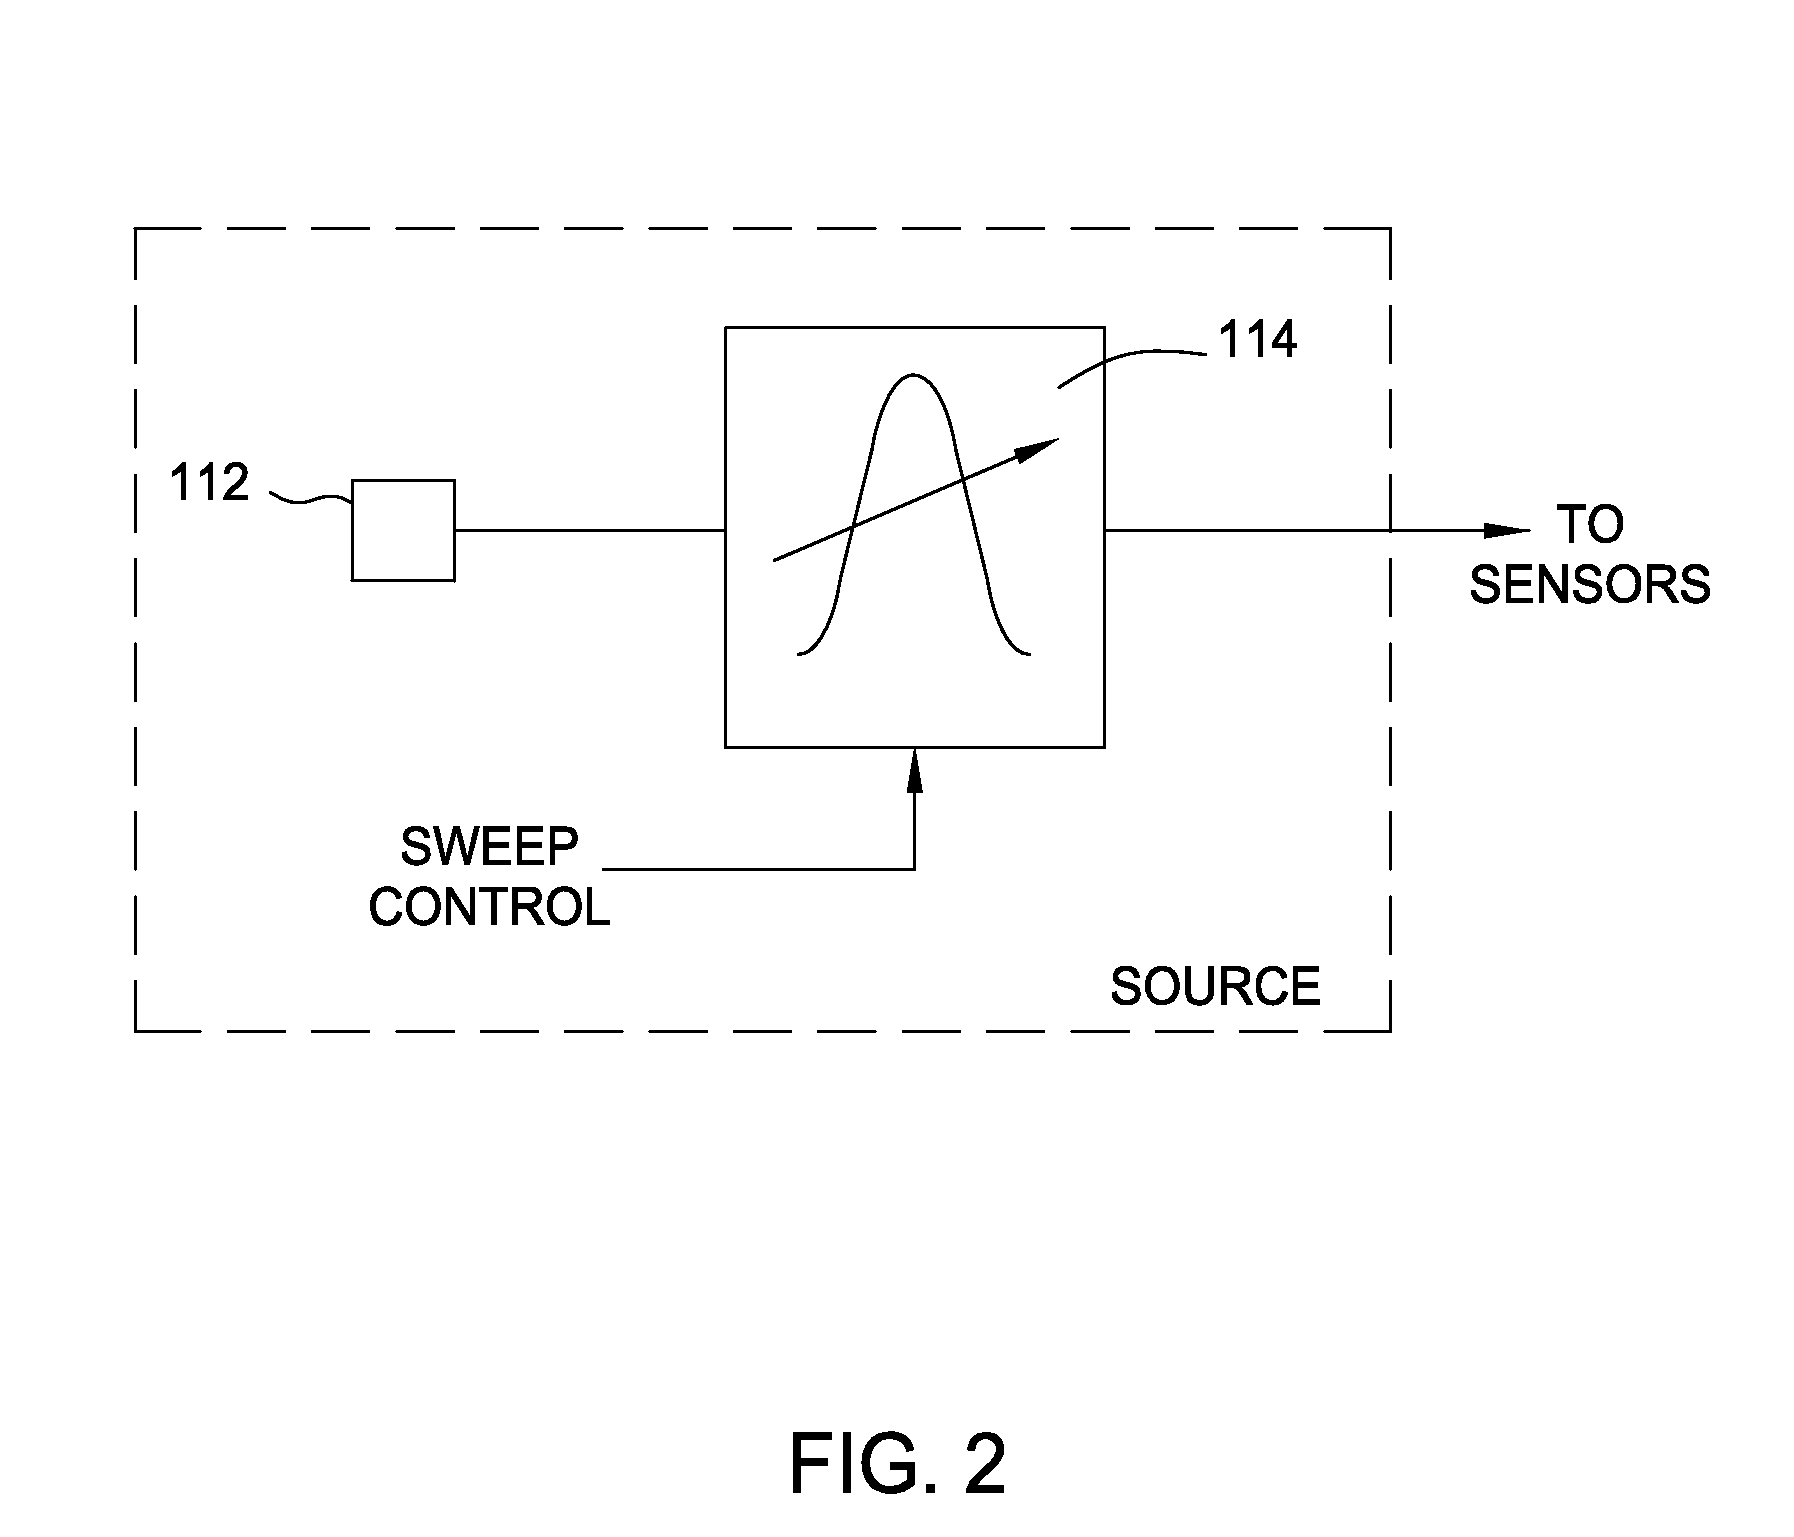 Time division multiplexing (TDM) and wavelength division multiplexing (WDM) fast-sweep interrogator